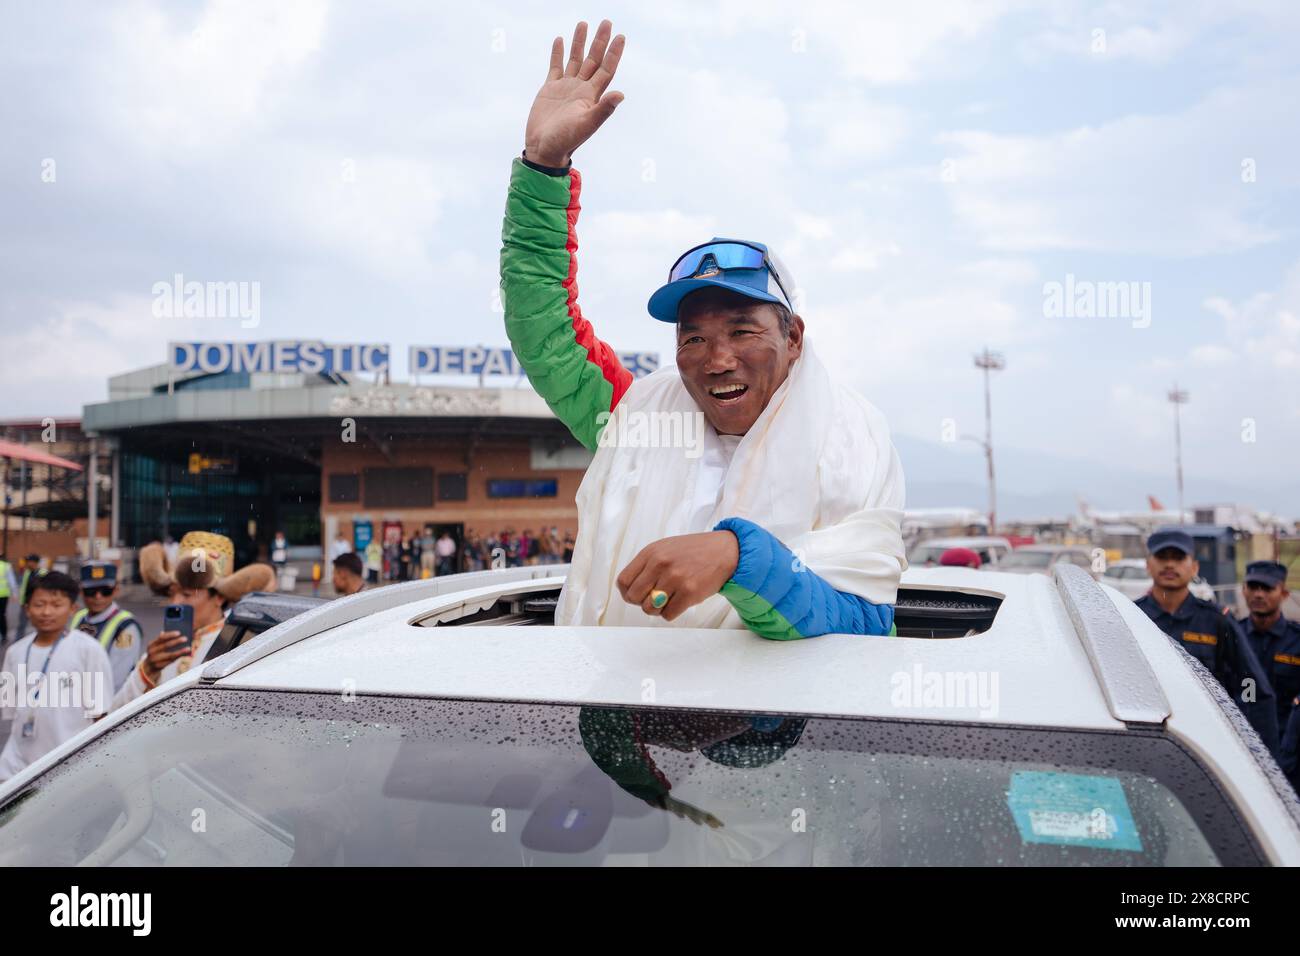 Kathmandu, Nepal. 24th May, 2024. Legendary Mountaineer Kami Rita Sherpa waves at people as he arrives after scaling Mt Everest for the 30th time, leading the world record of most ascents on the world's highest peak Mount Everest at Tribhuvan International Airport. Kami Rita Sherpa, considered one of the greatest mountain guides, reached the 8,849-meter (29,032-foot) summit at 7:49 AM local time on Wednesday 22 May, 2024 according to expedition organizer Seven Summits Treks. Credit: SOPA Images Limited/Alamy Live News Stock Photo